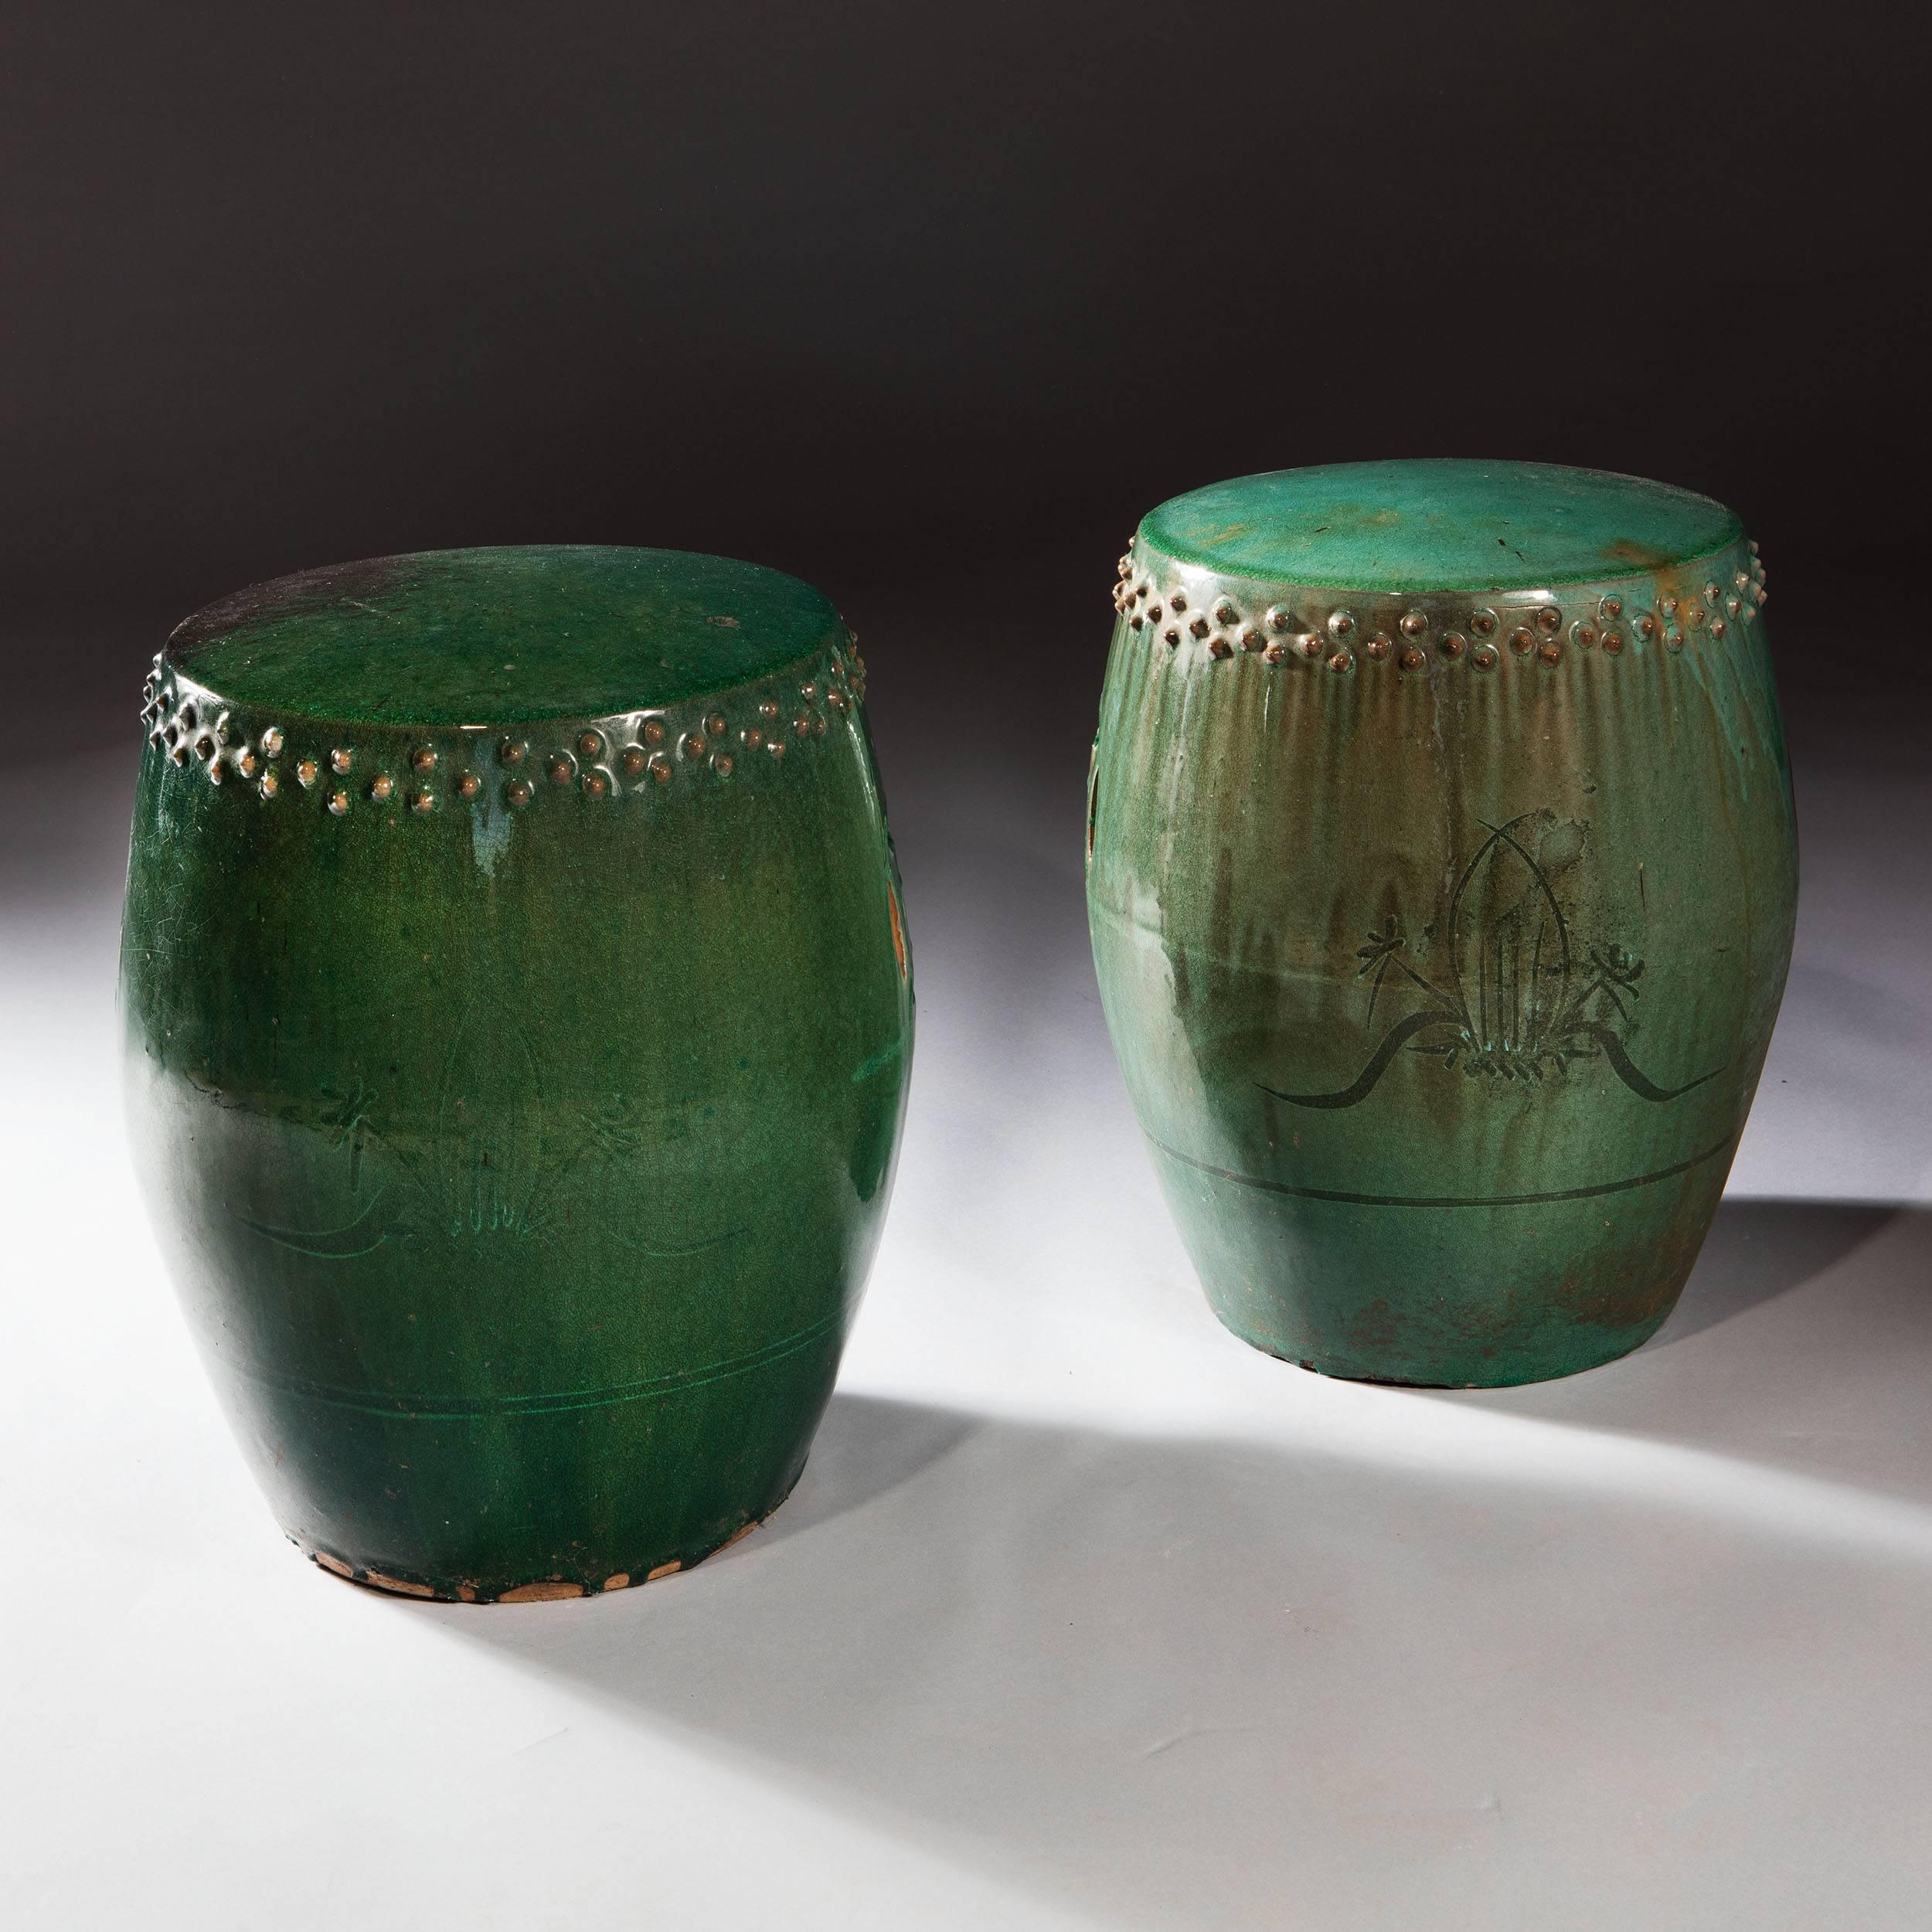 Pair of Vibrant Green Glazed Chinese Pottery Stools In Excellent Condition In London, by appointment only